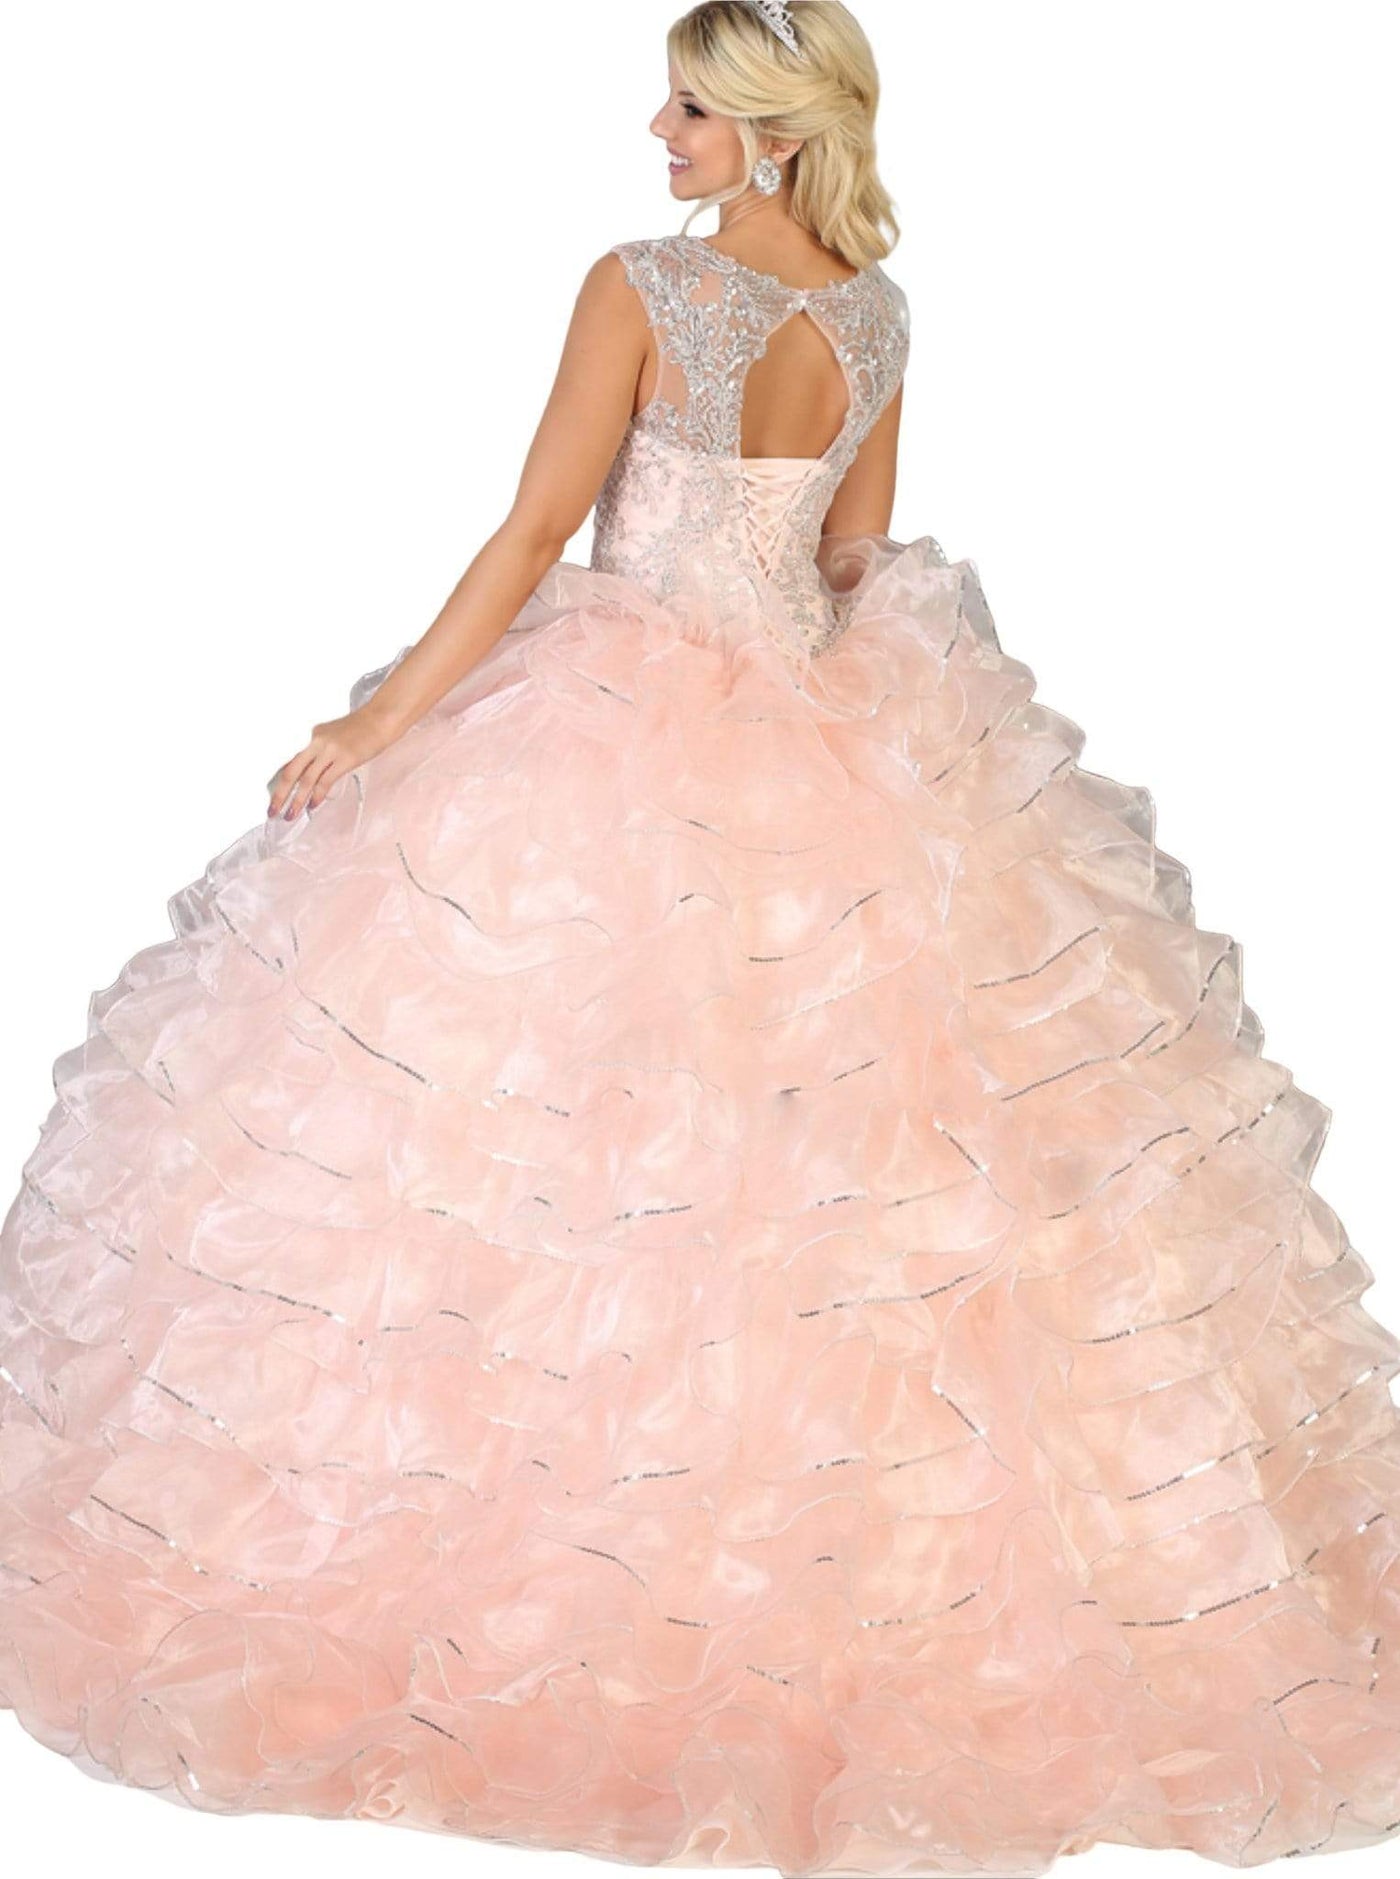 May Queen - LK125 Embellished Scoop Tiered Quinceanera Special Occasion Dress 4 / Blush